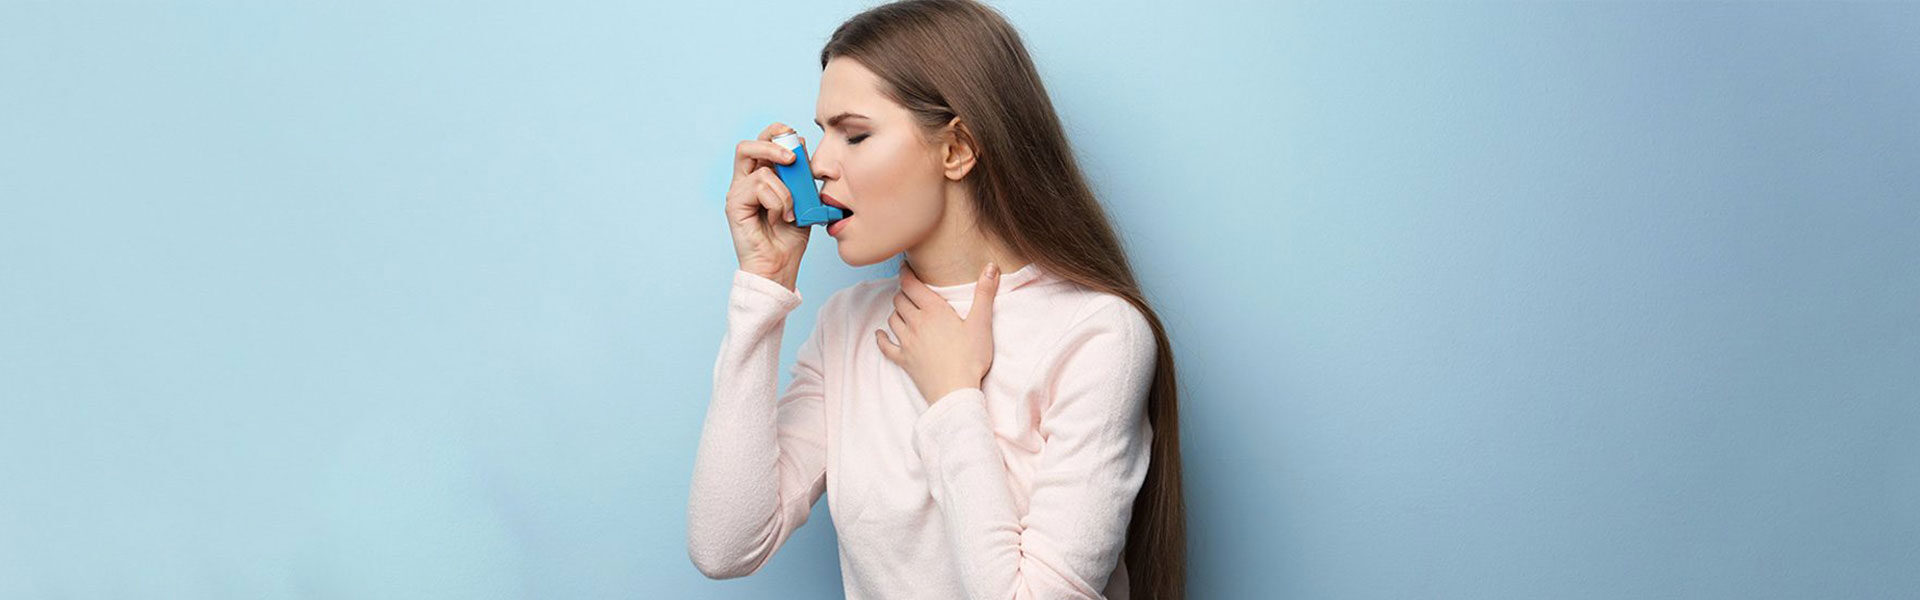 Asthma-and-COPD-Similarities-Differences-and-the-Connection-Between-Them